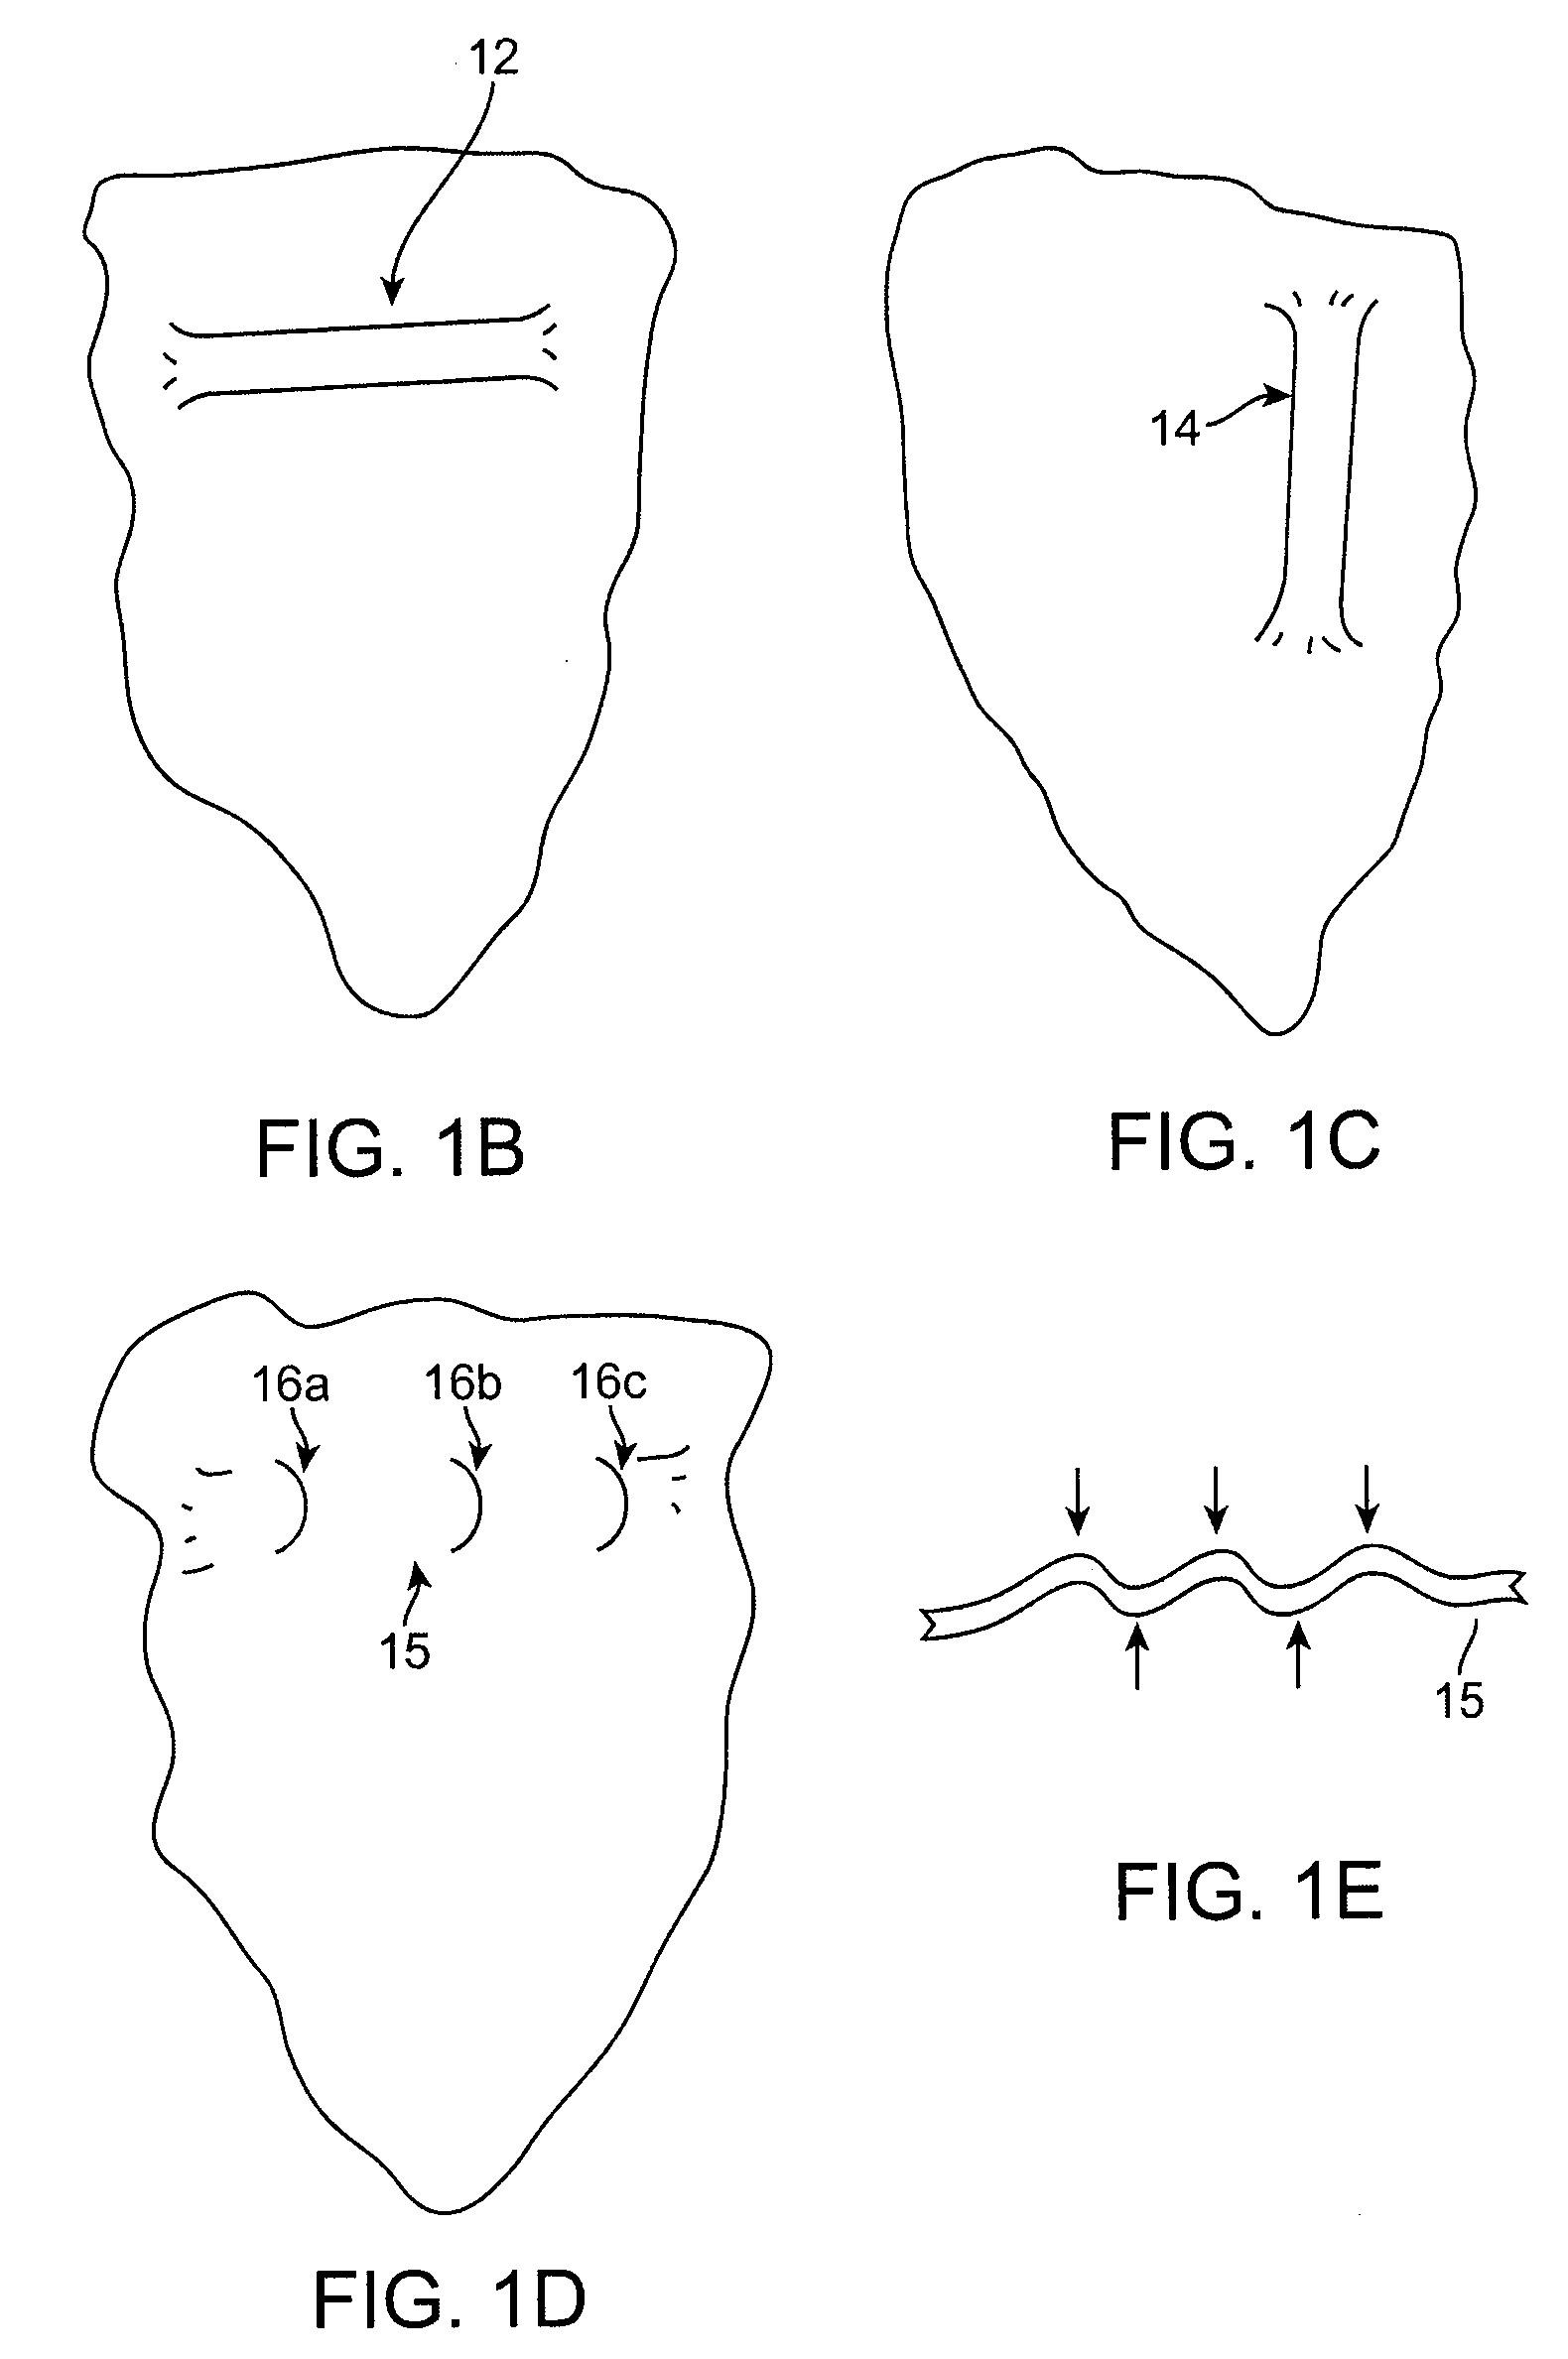 Orthodontic repositioning appliances having improved geometry, methods and systems